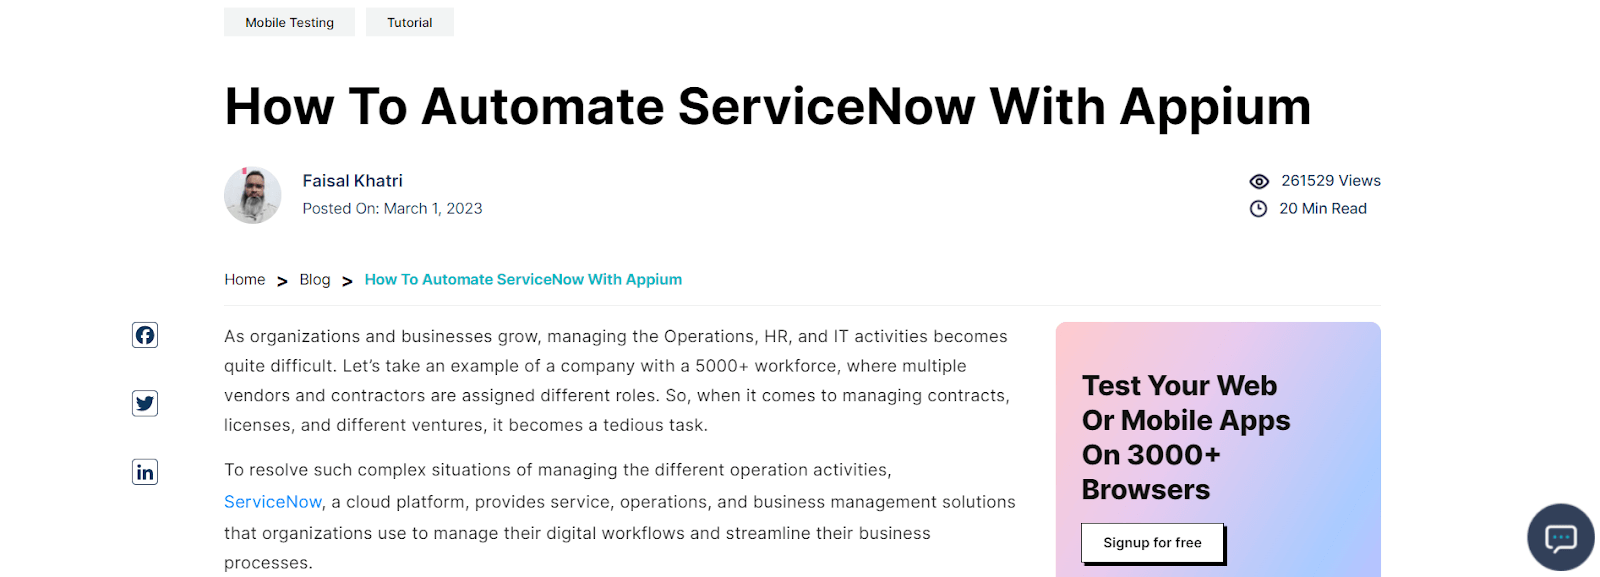 Automate ServiceNow With Appium